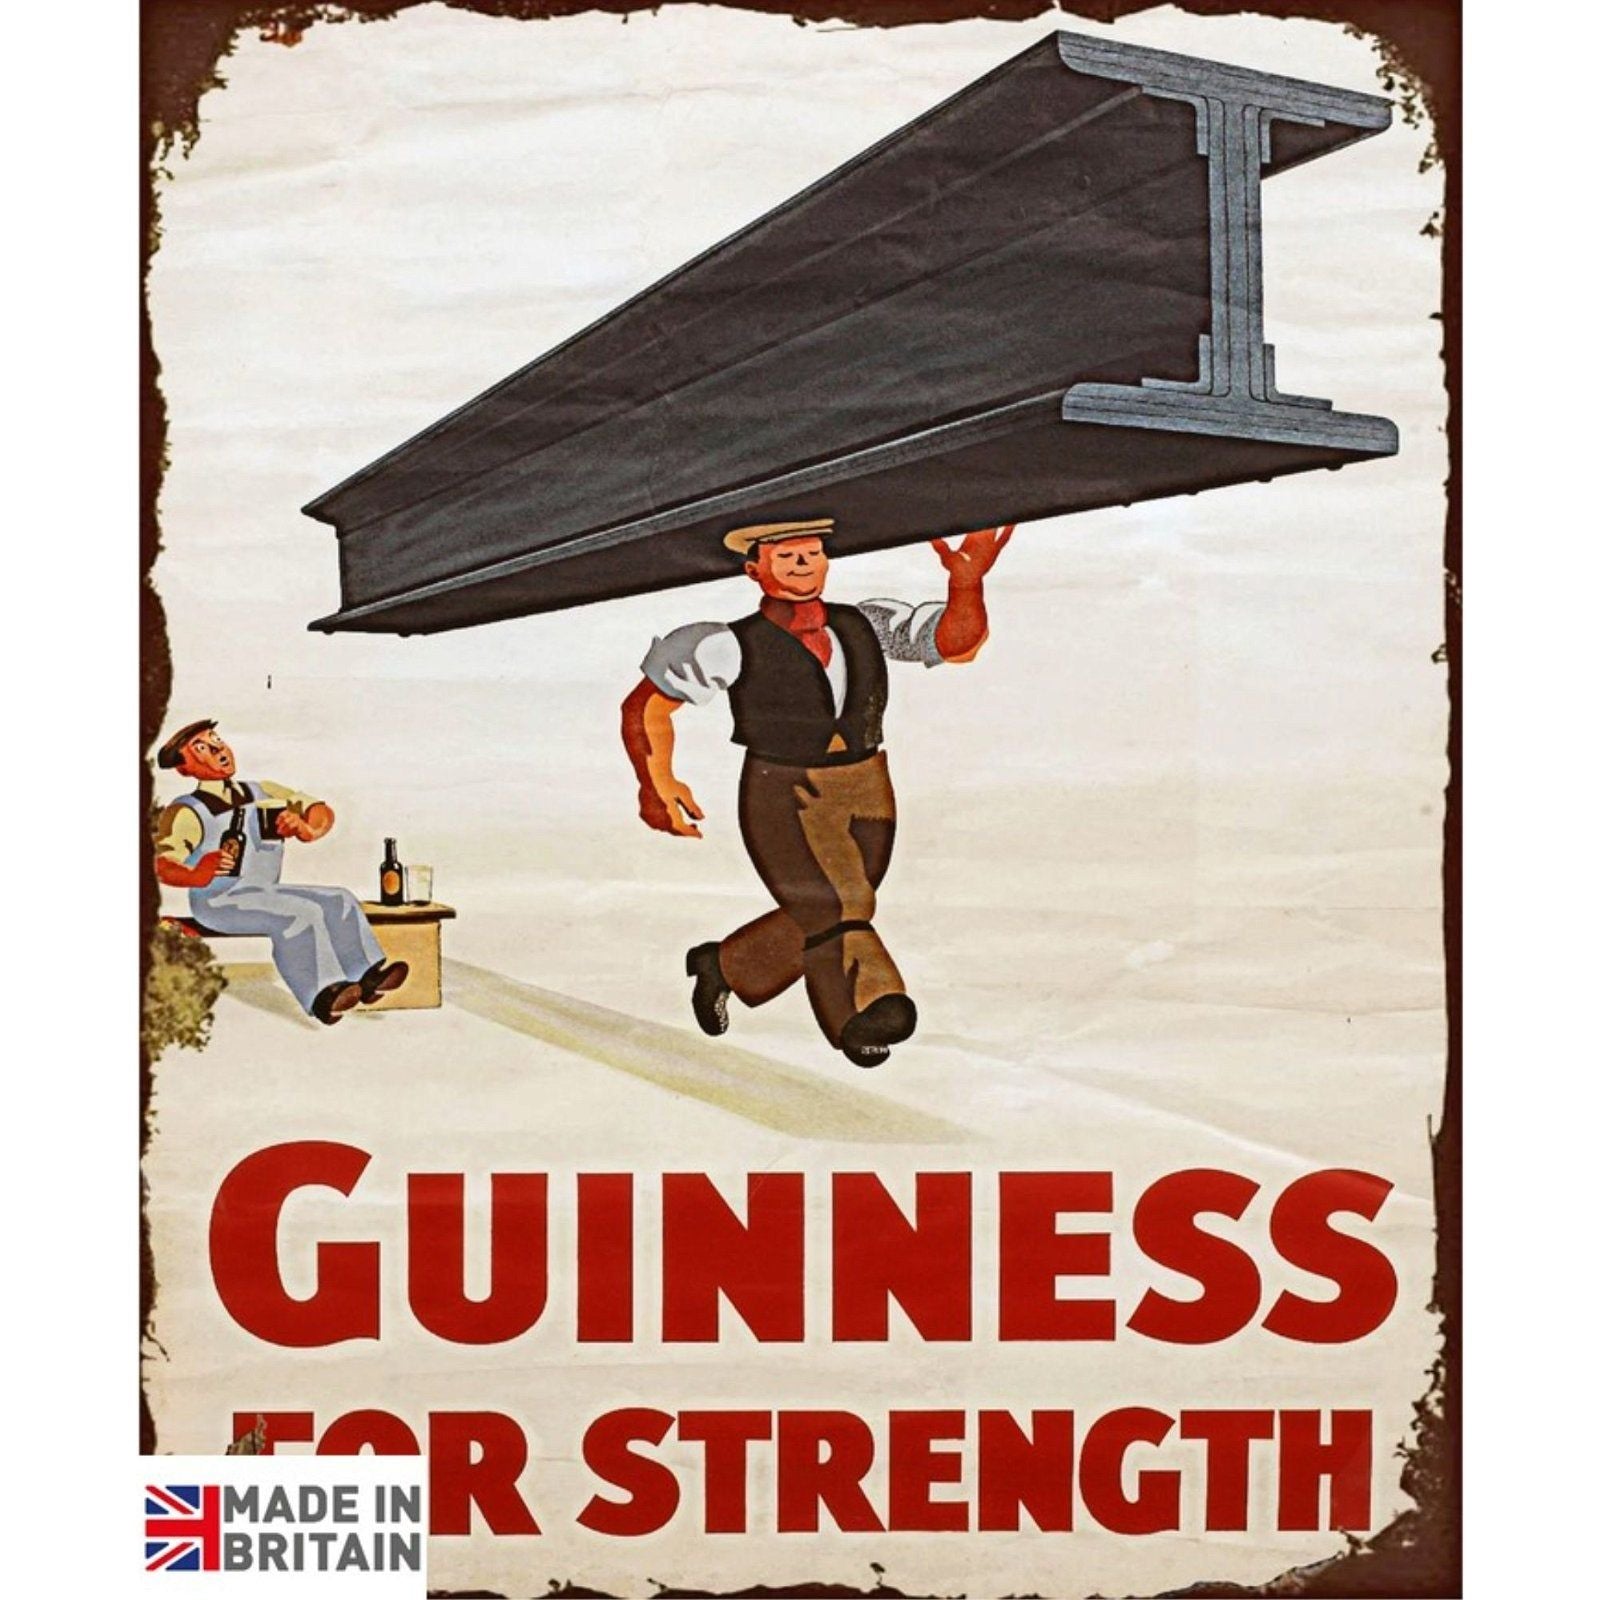 Large Metal Sign 60 x 49.5cm Guinness Beer Advert Girder - Ashton and Finch